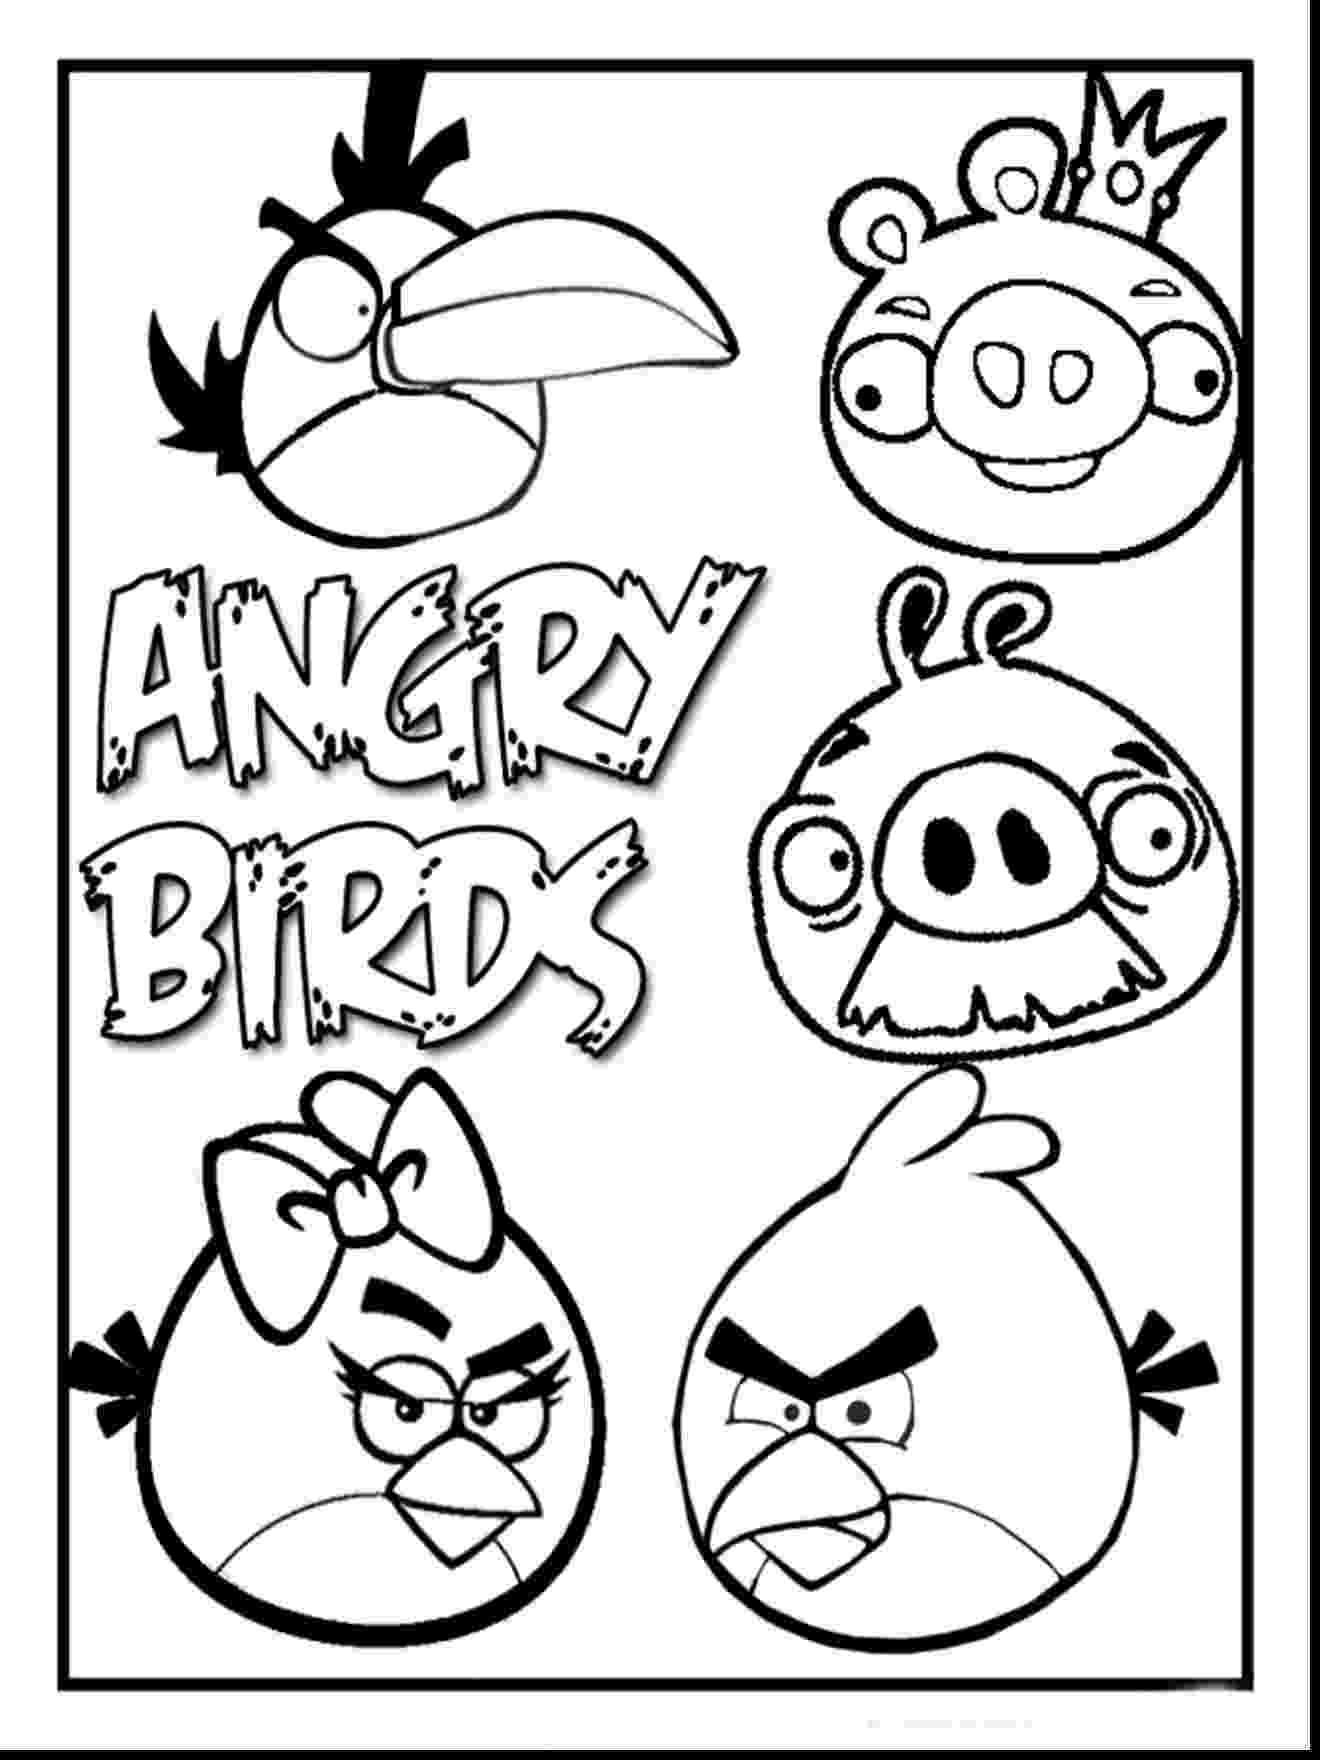 star wars angry birds coloring pages 30 coloring pages angry birds star wars coloring pages pages wars star birds angry coloring 